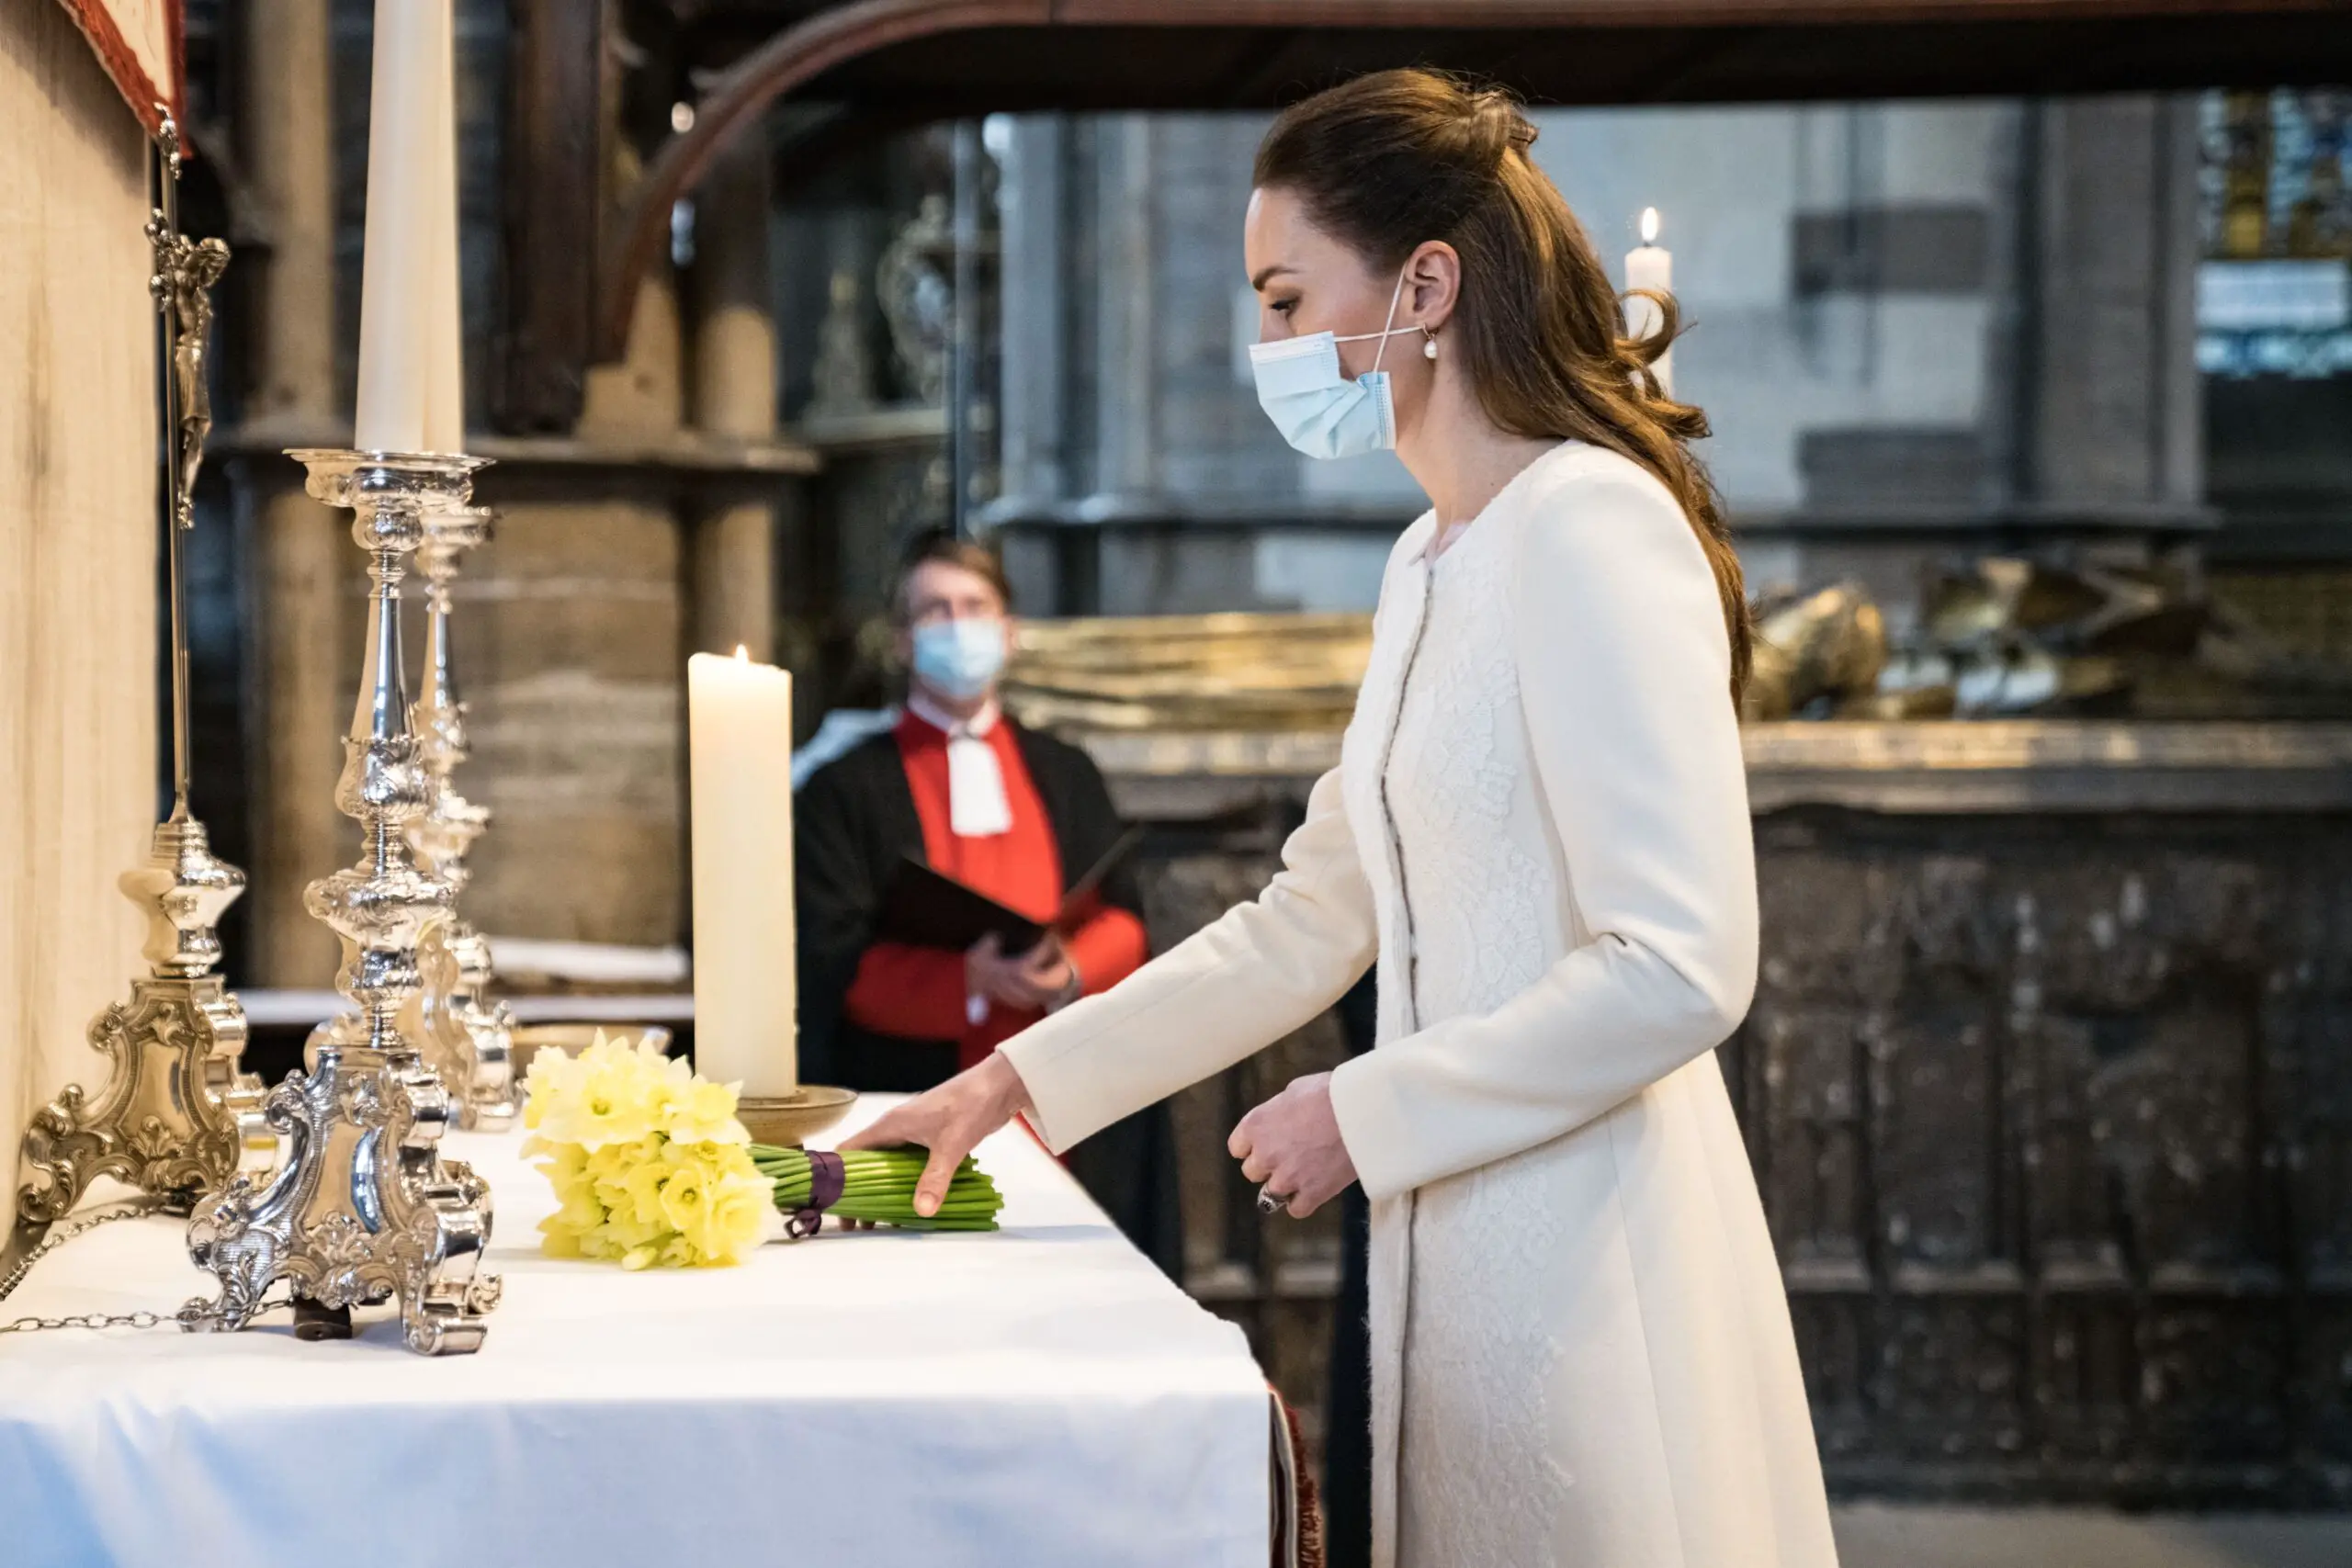 The Duchess of Cambridge laid deffodils at the poet corner in London